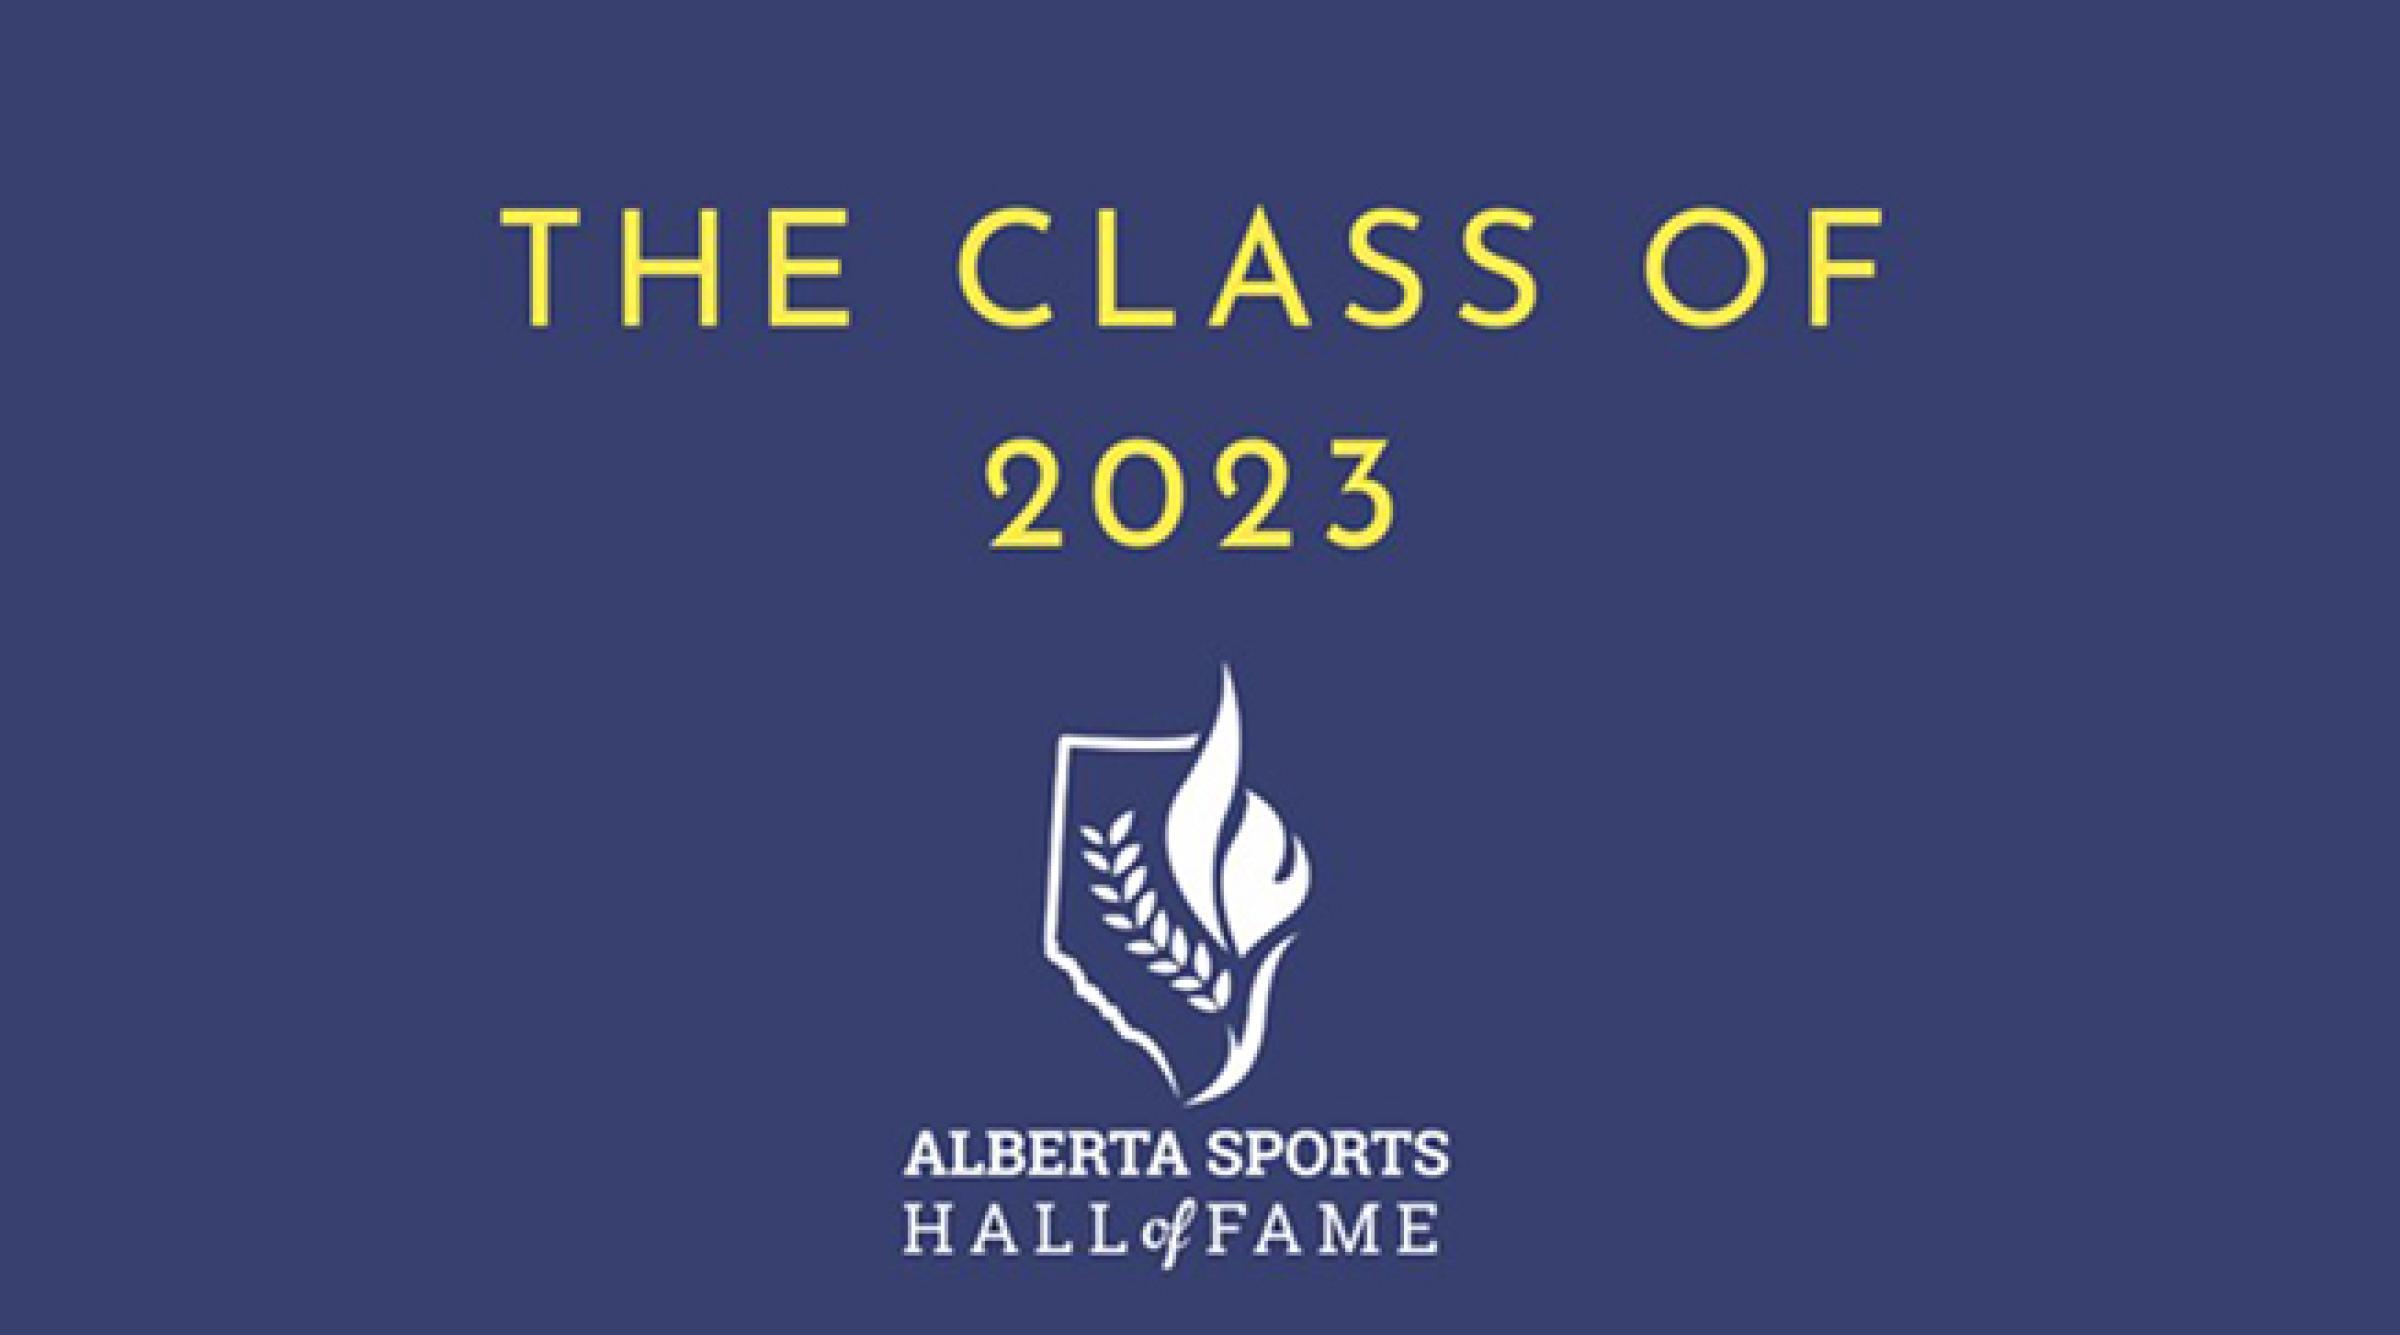 Alberta Sports Hall of Fame Class of 2023 graphic